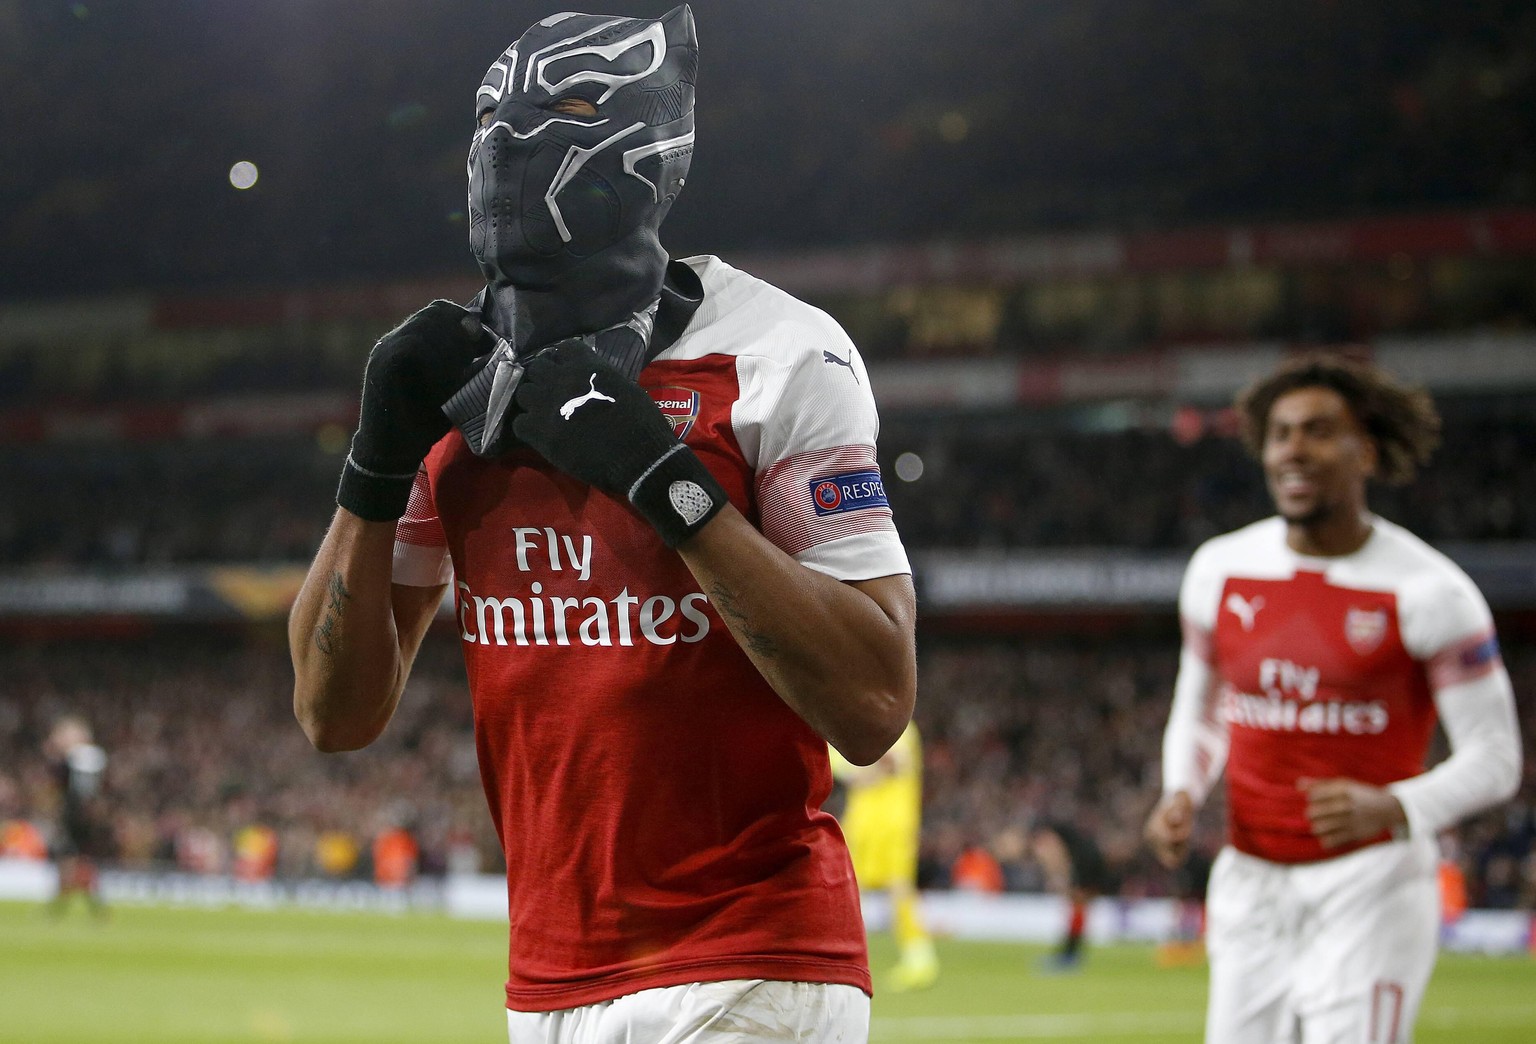 190315 -- LONDON, March 15, 2019 -- Pierre-Emerick Aubameyang of Arsenal celebrates scoring the third goal by putting on a mask of Super Hero Black Panther during the Europa League Round of 16 second  ...